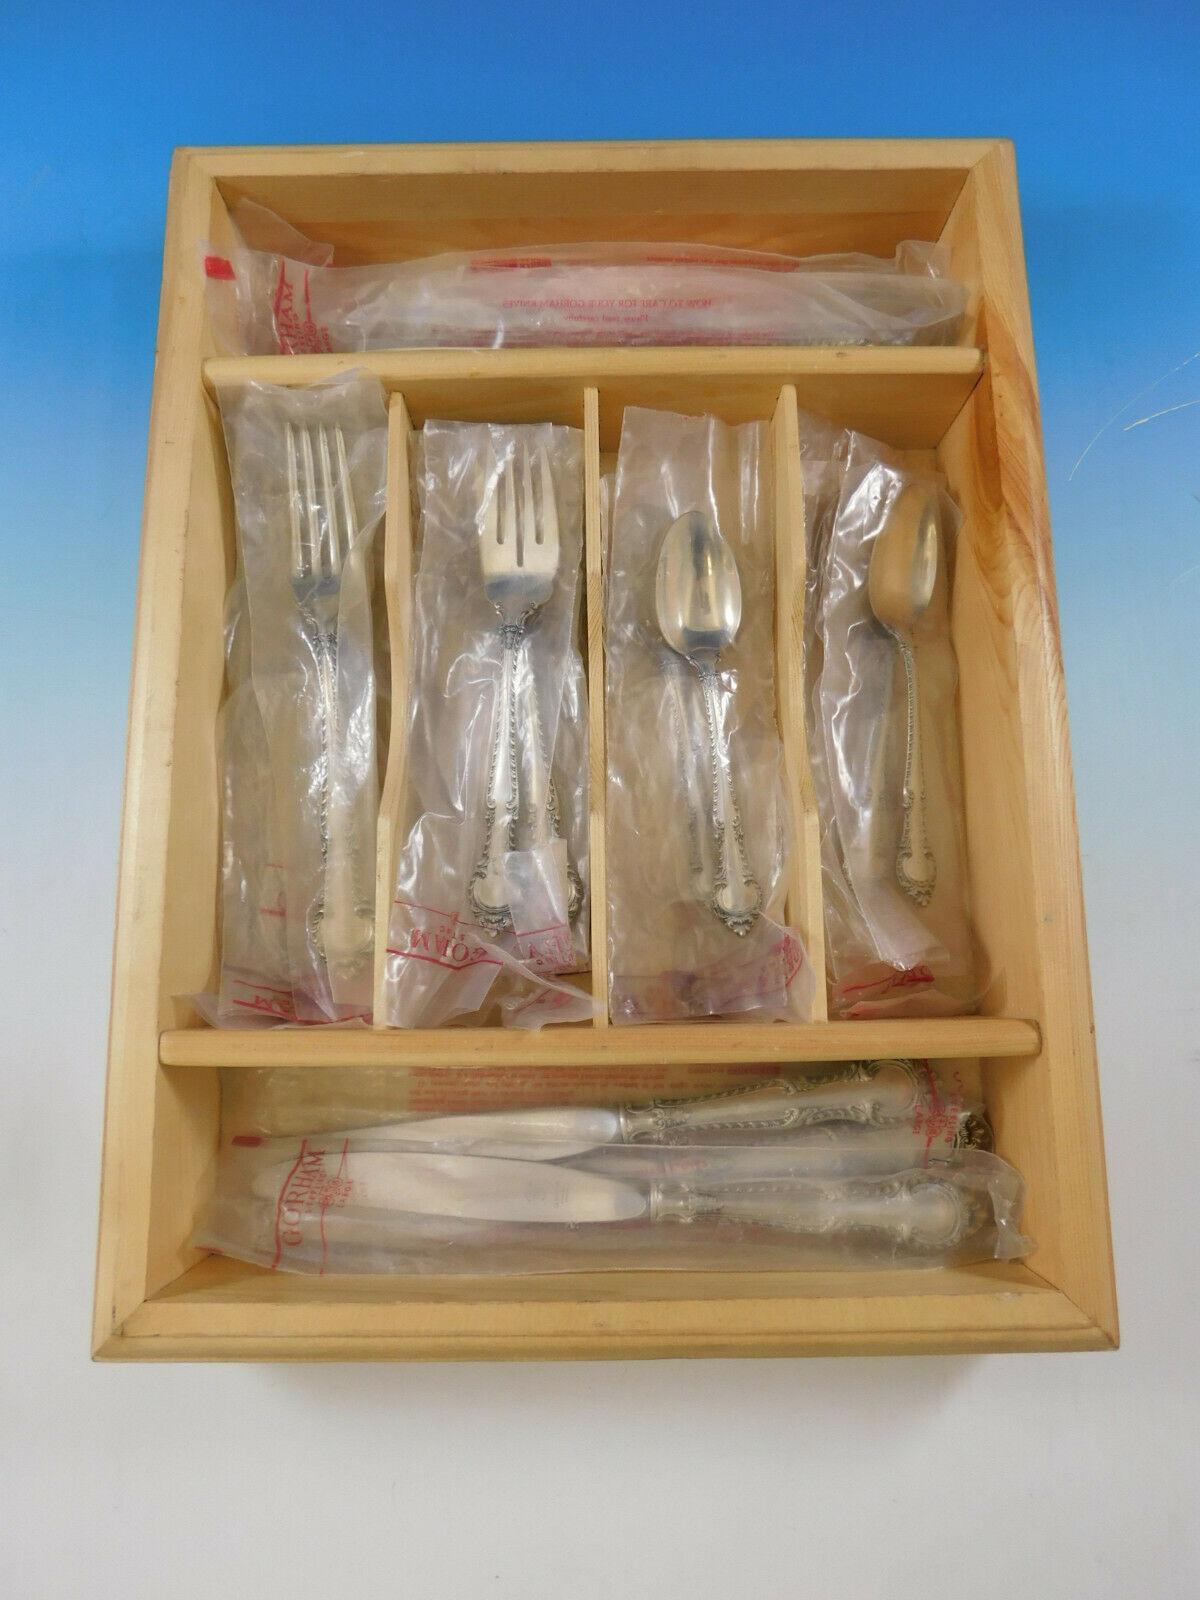 New, unused dinner size English Gadroon by Gorham sterling silver flatware set of 24 pieces. Great starter set! This set includes:

6 dinner size knives, 9 1/2